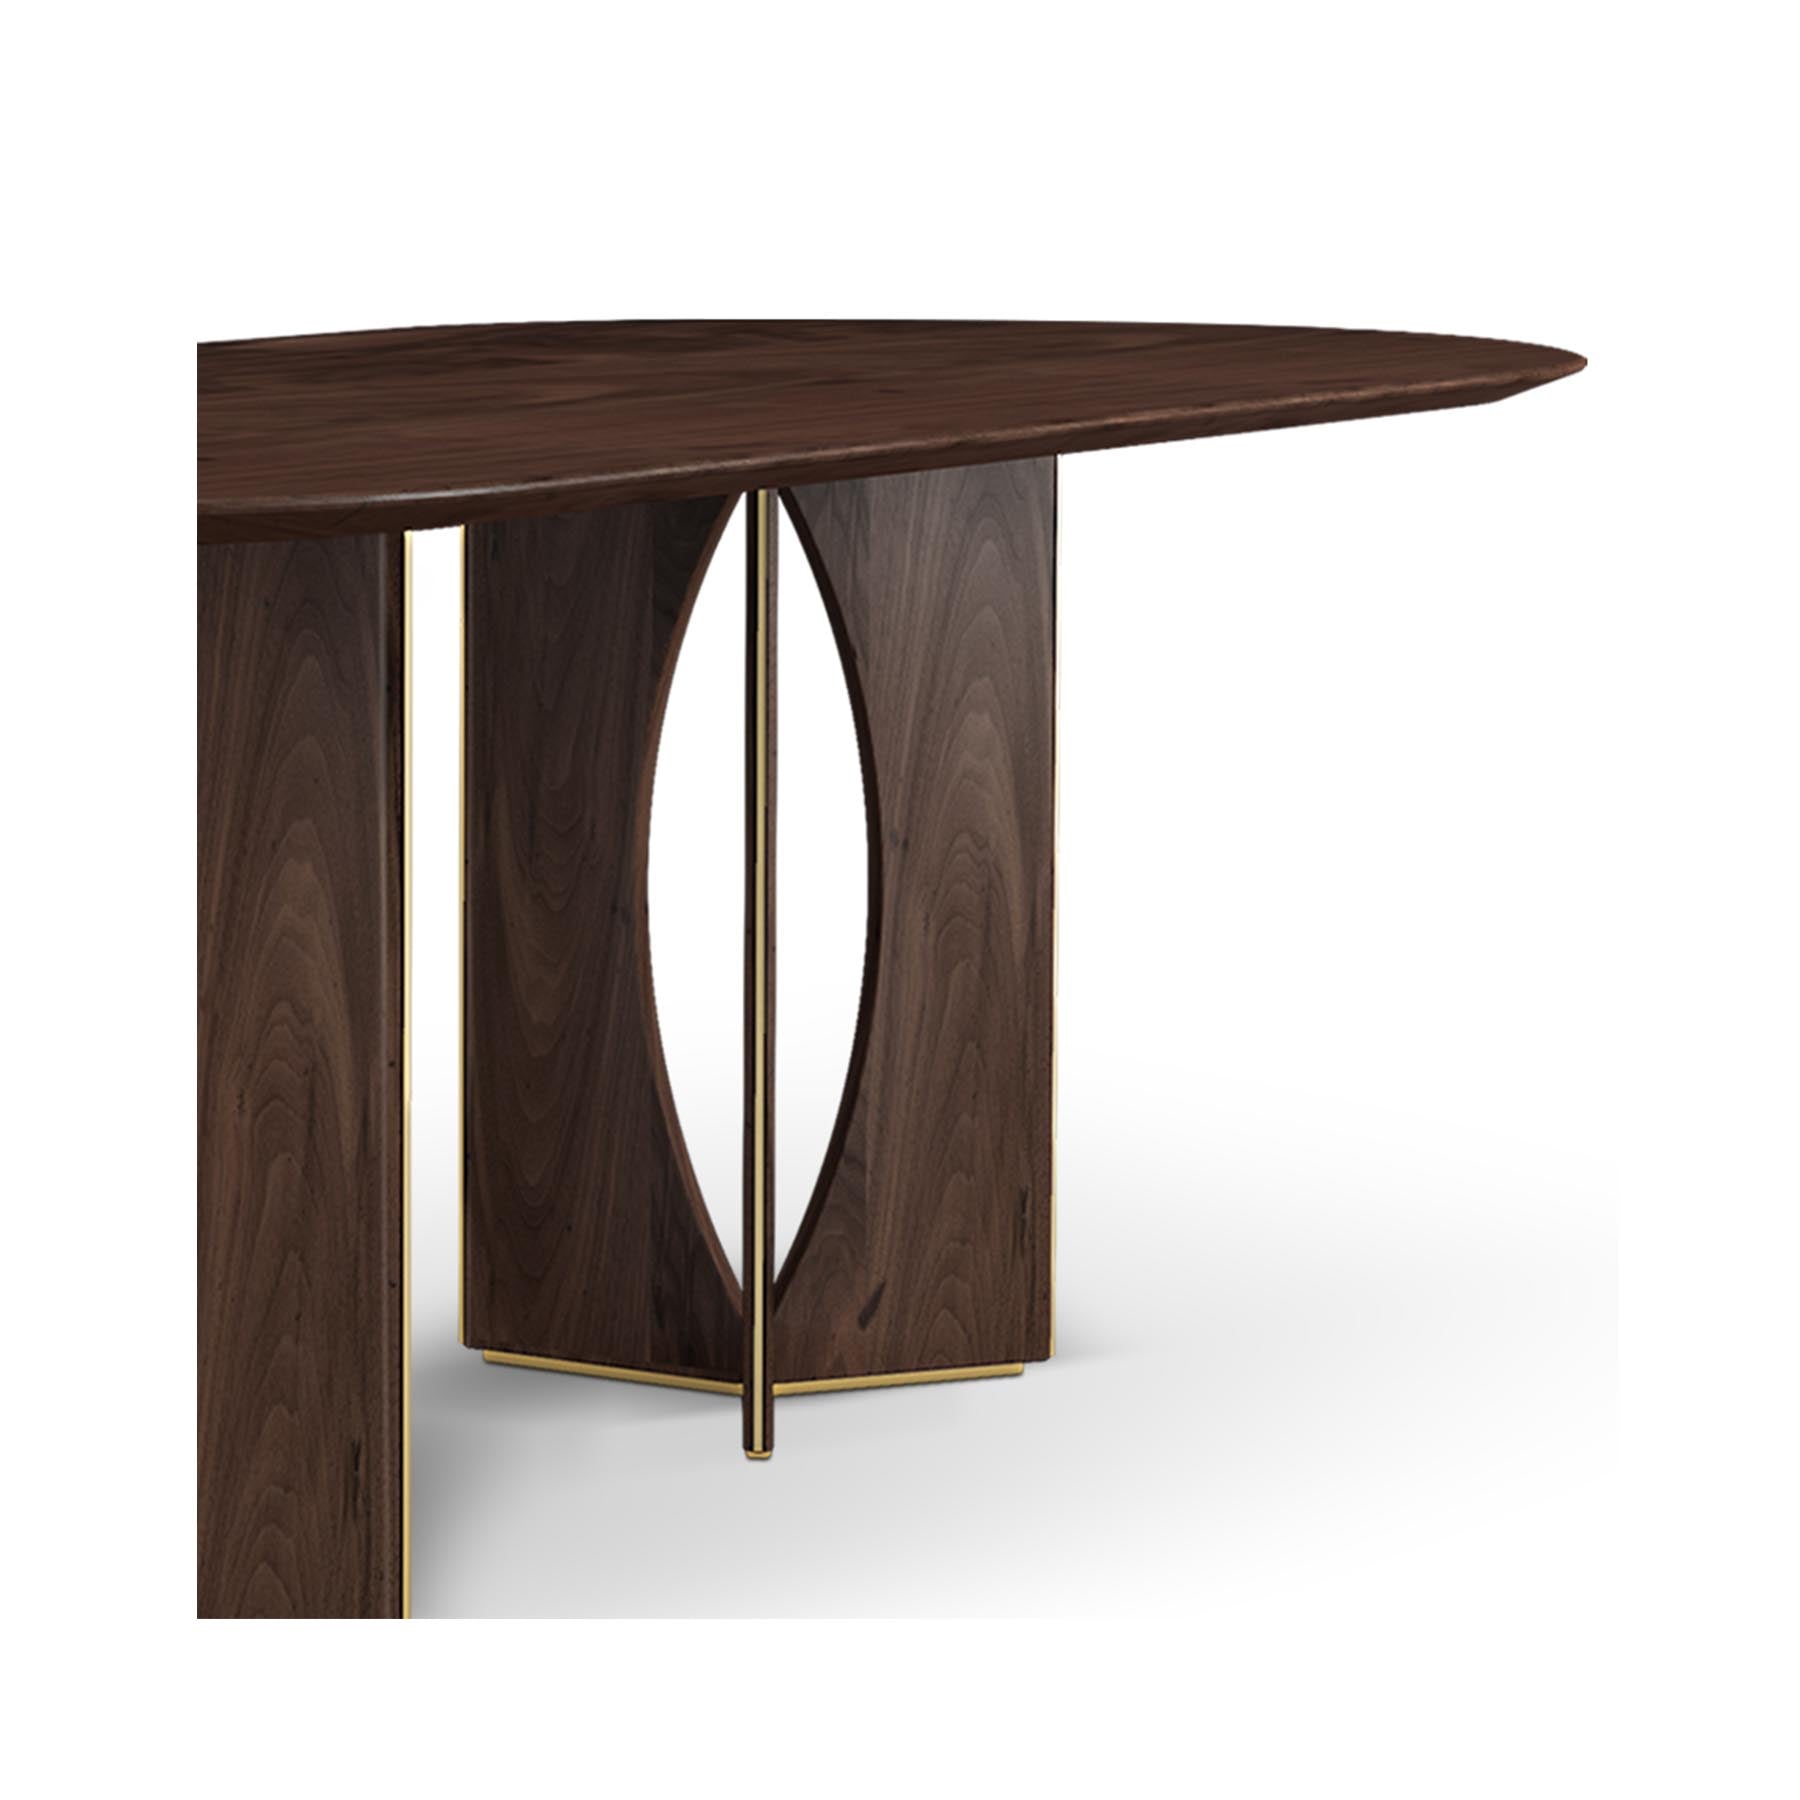 TAYLOR - DINING TABLE | Modern Furniture + Decor